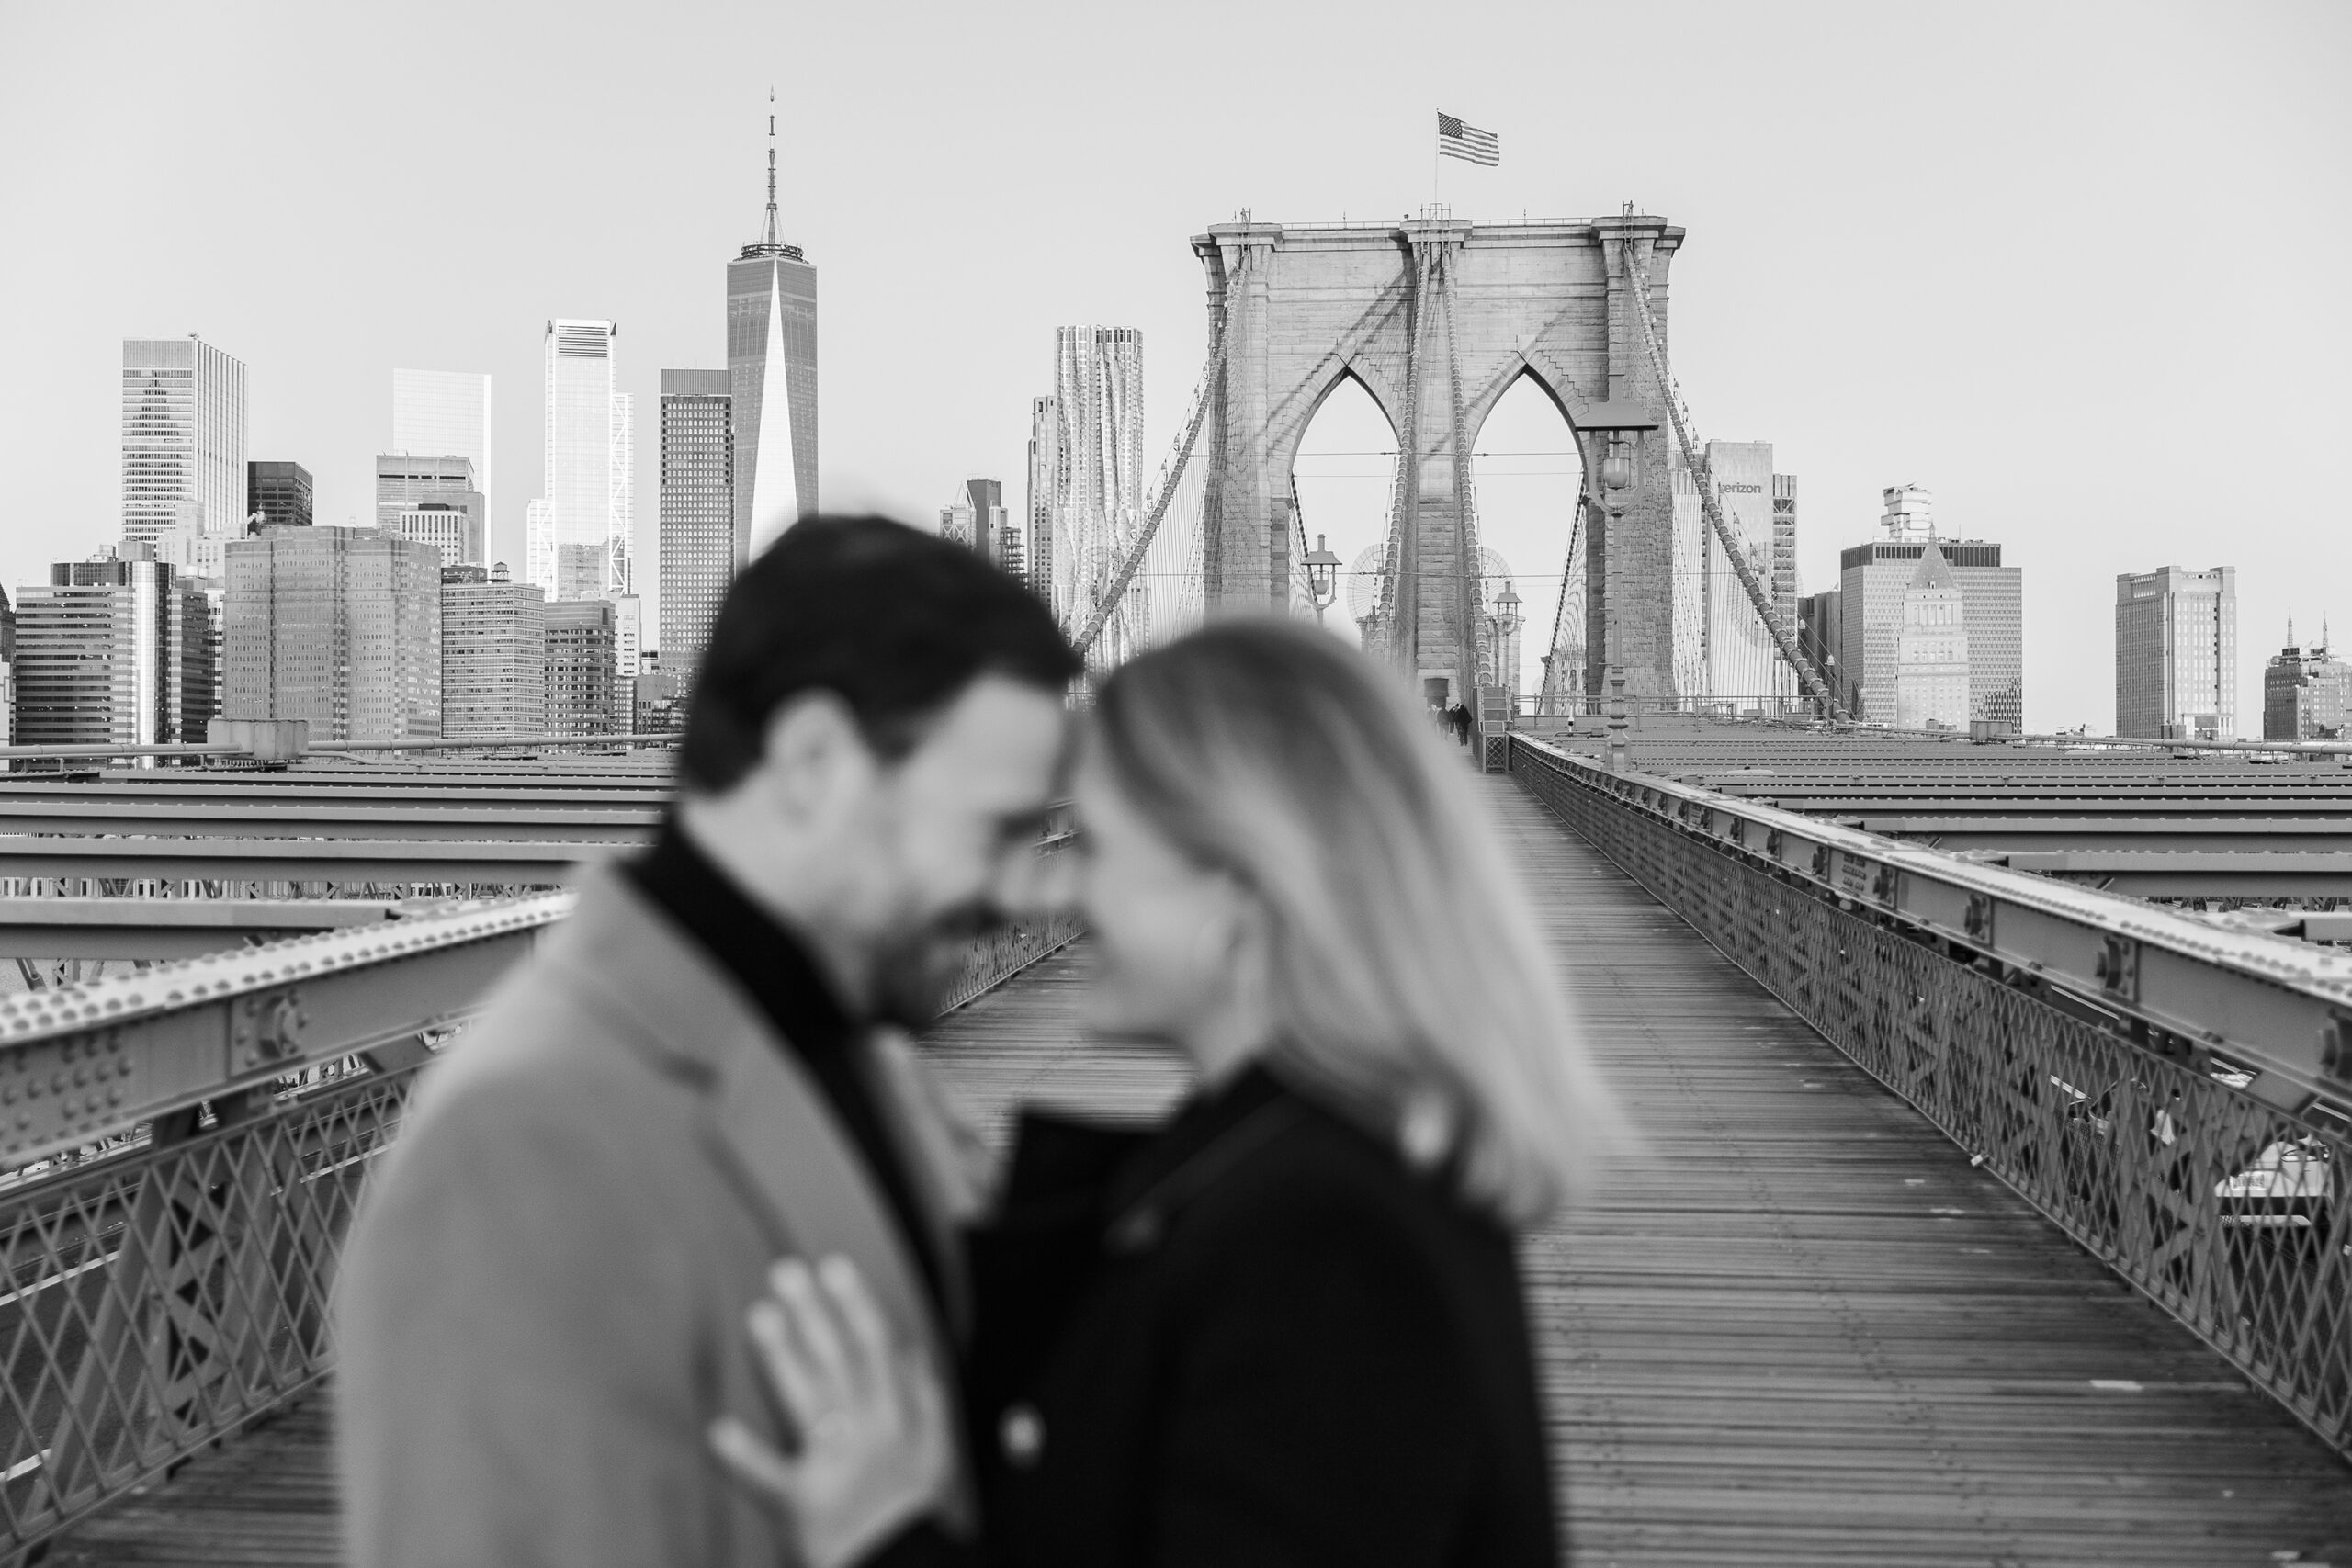 Cheerful dumbo engagement session